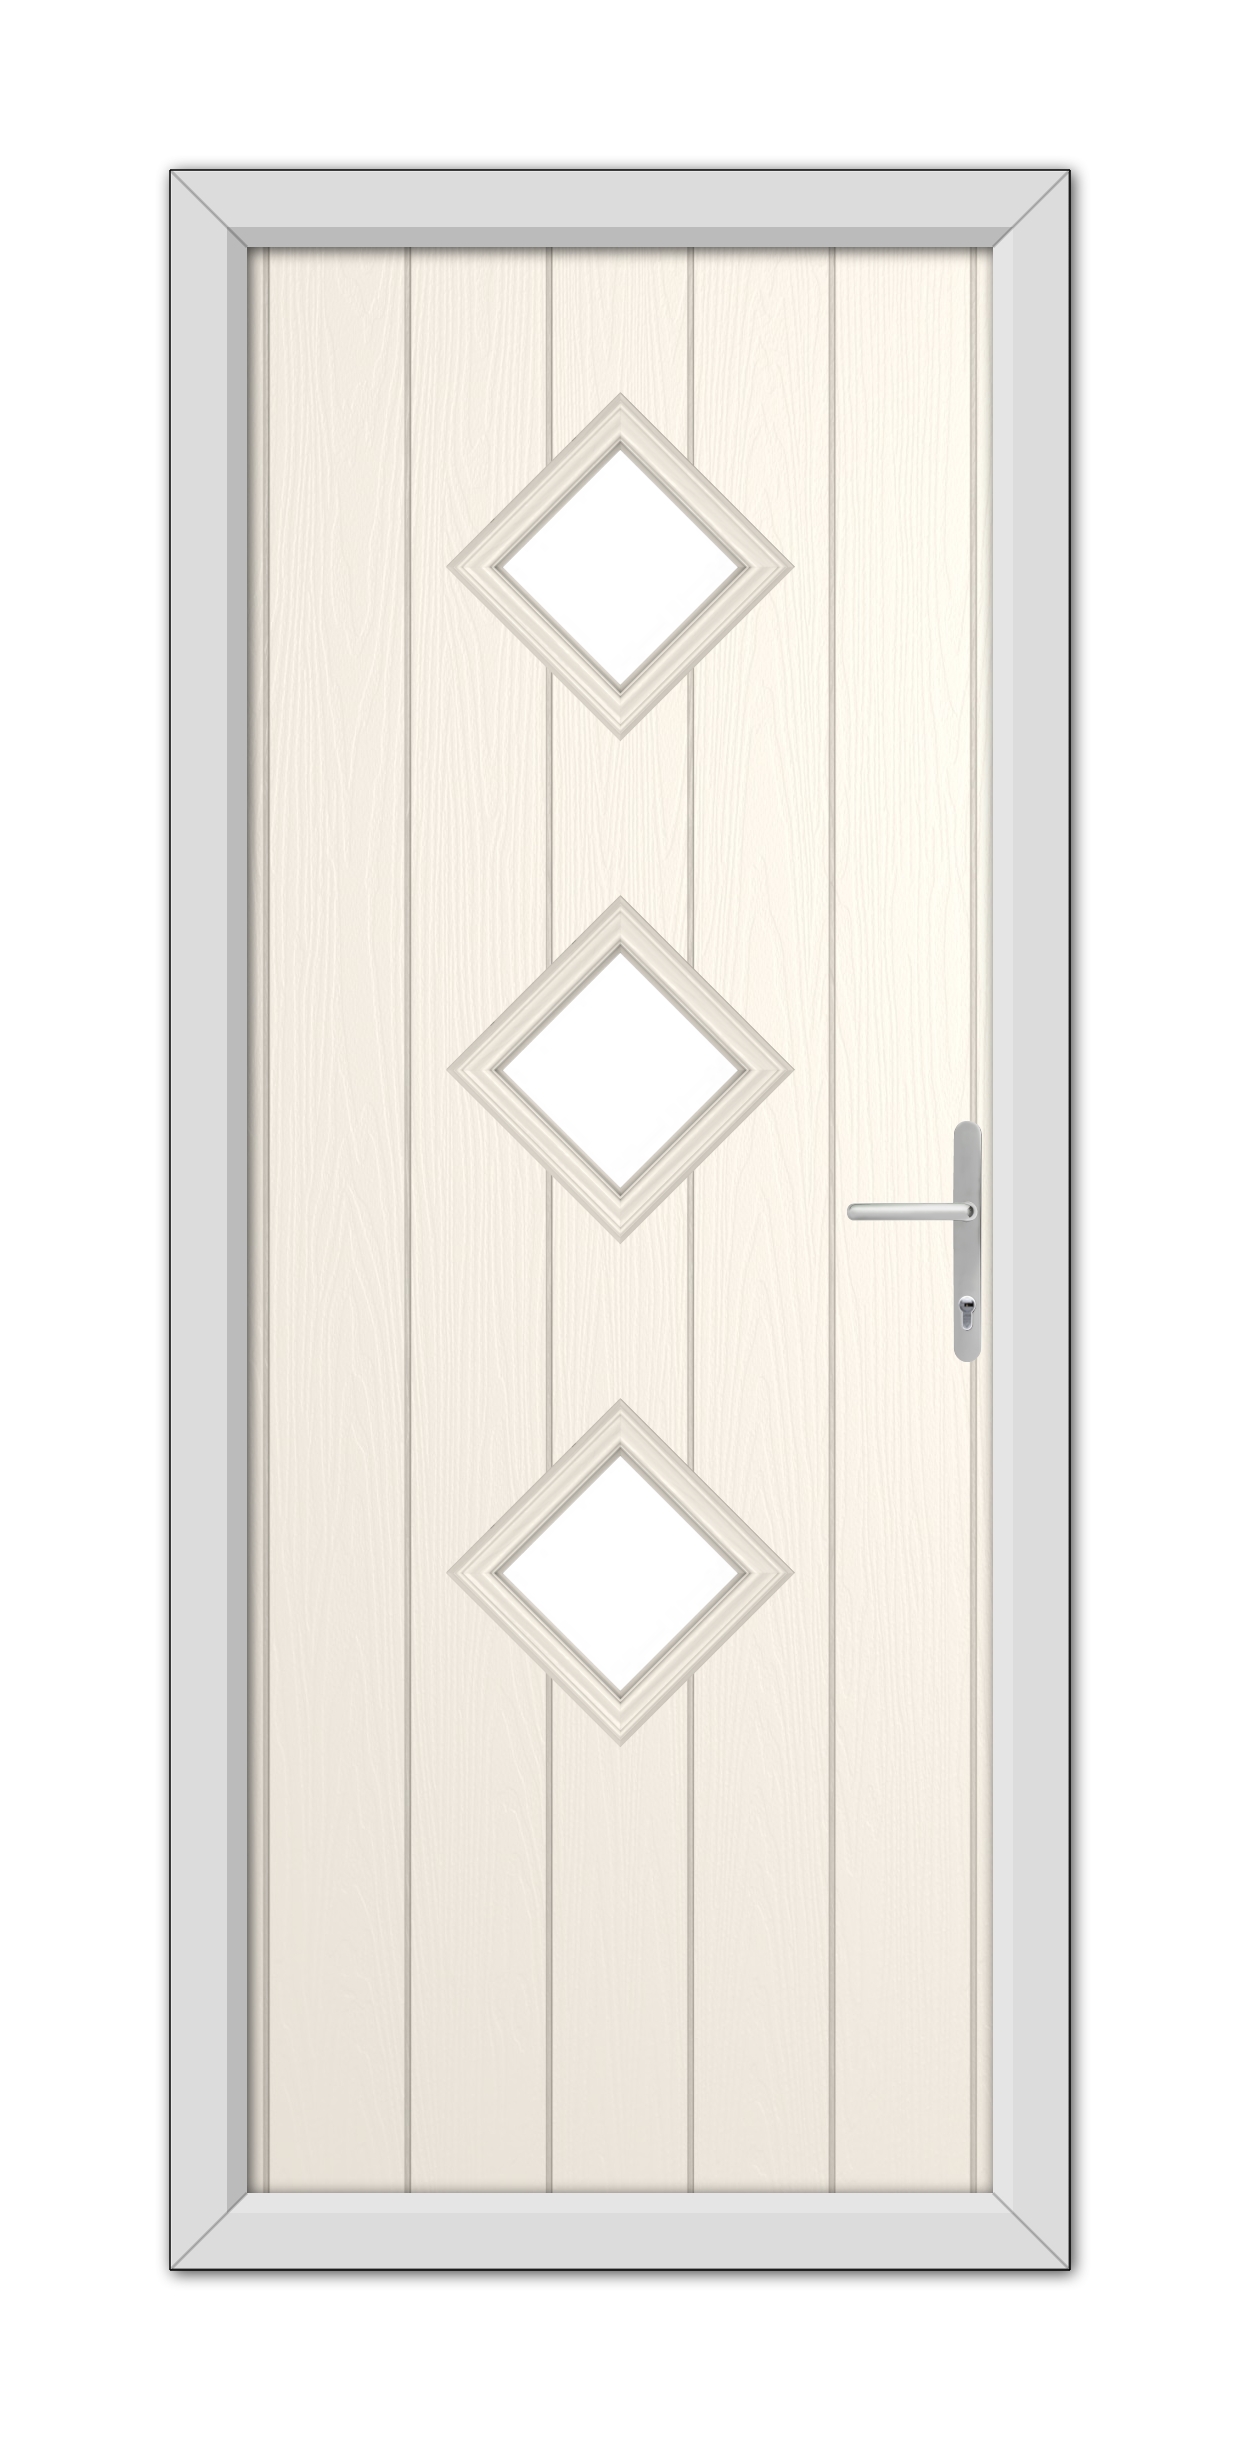 A modern white foil richmond composite door with three diamond-shaped windows and a metallic handle, set within a grey frame.